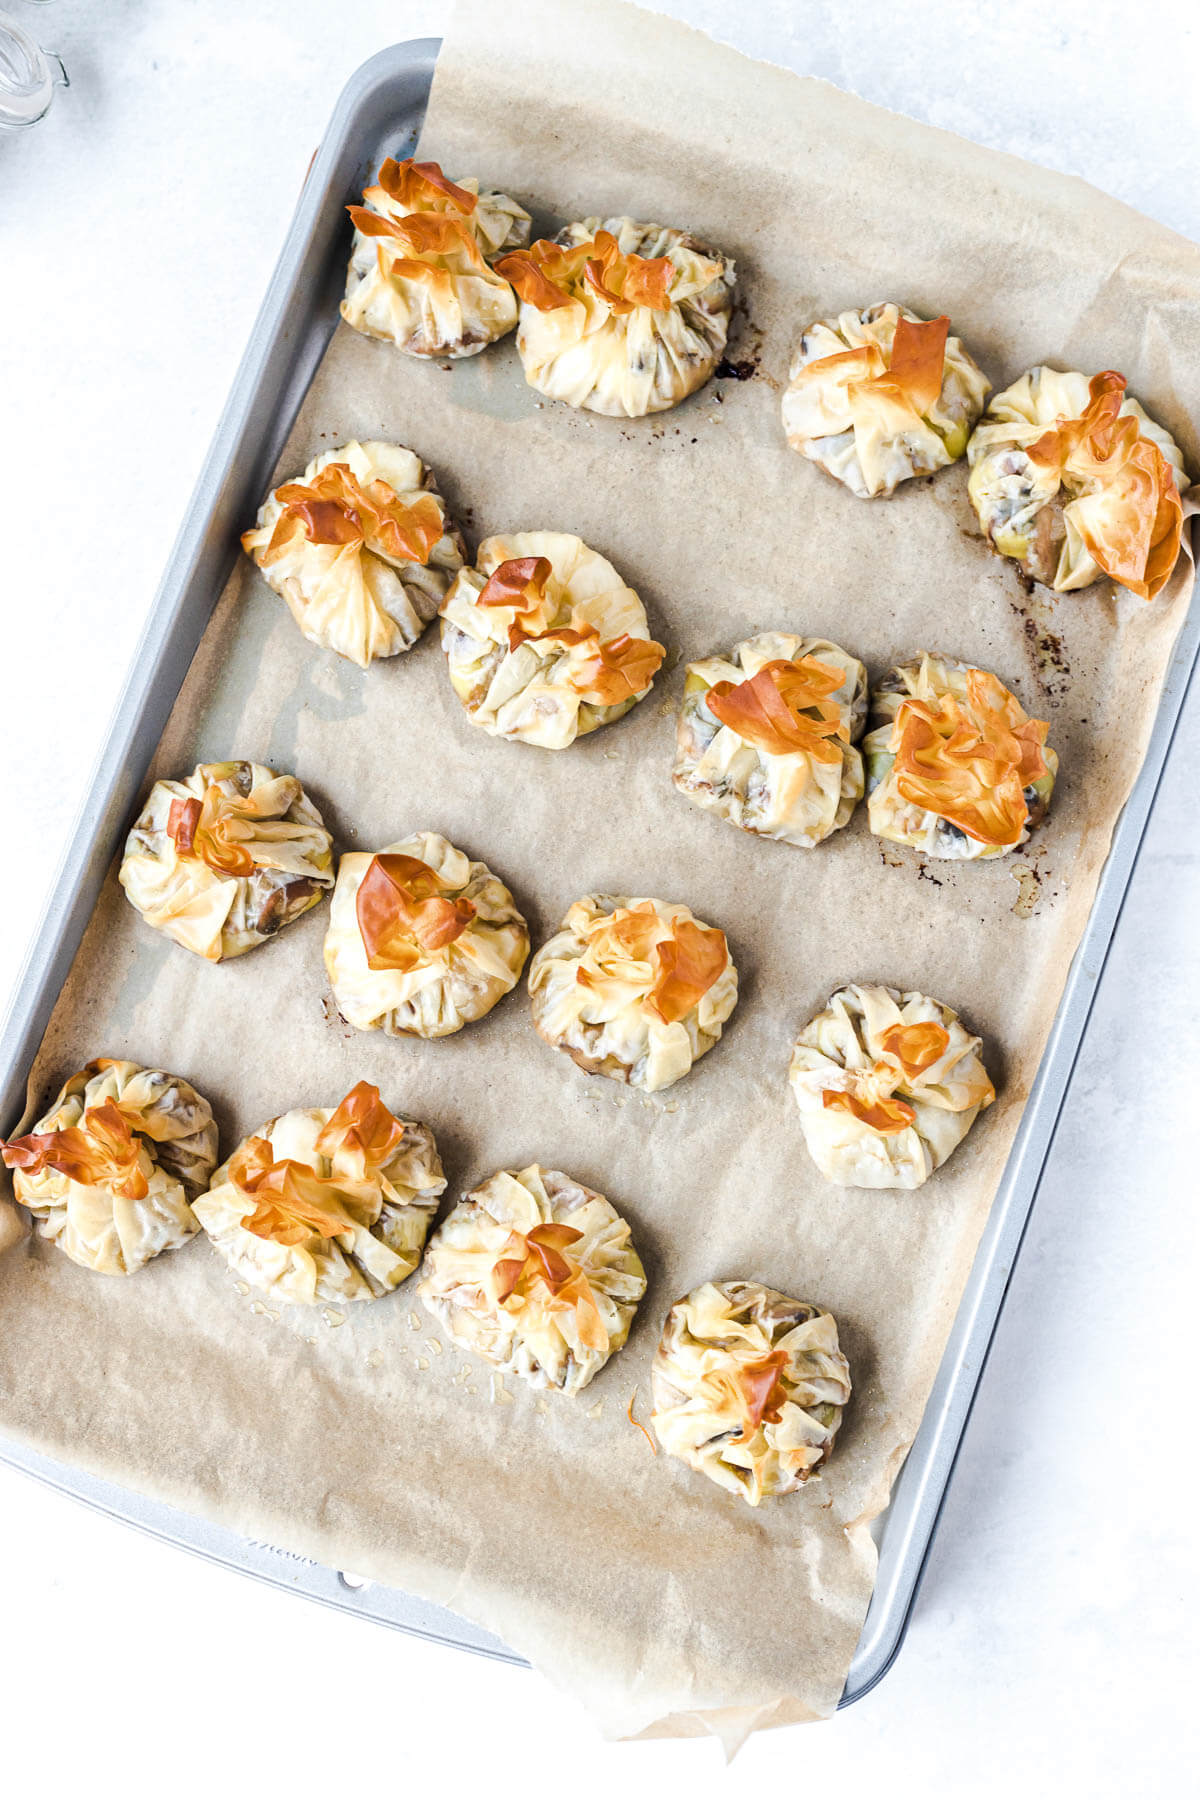 A baking sheet filled with golden baked mushroom goat cheese filo pastry parcels.